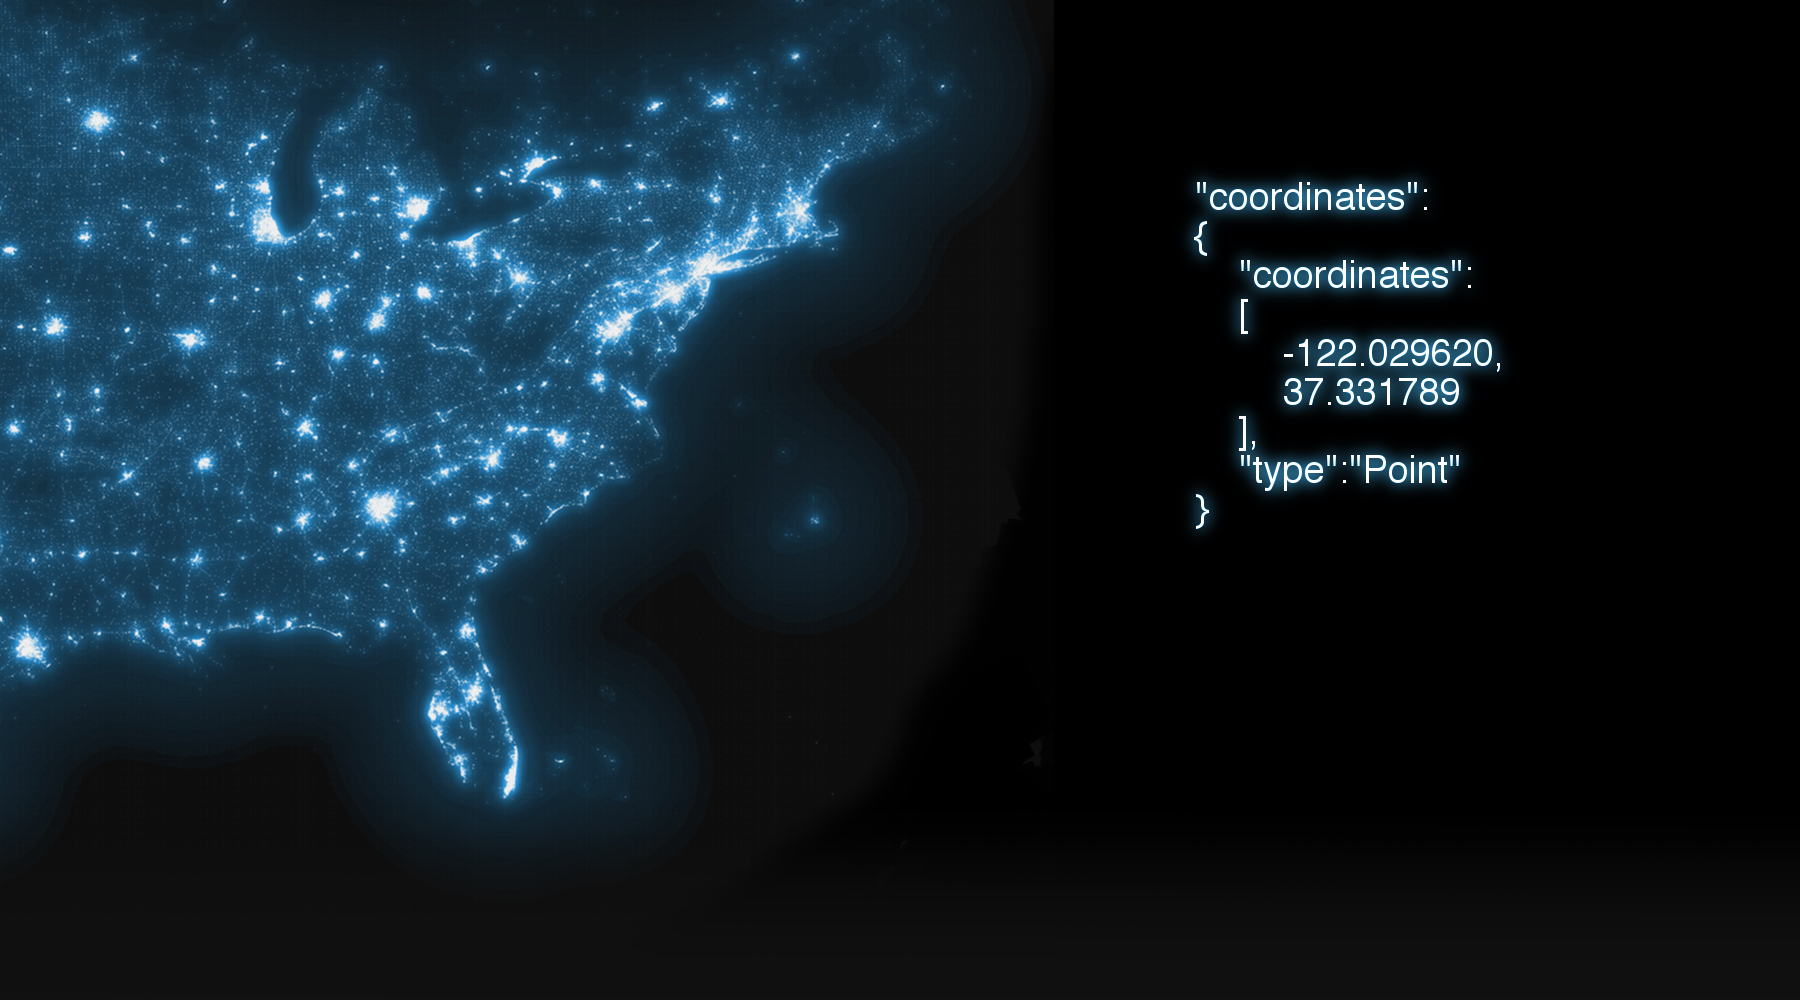 From Digital Epidemiology, 250 million tweets with high resolution geospatial information.